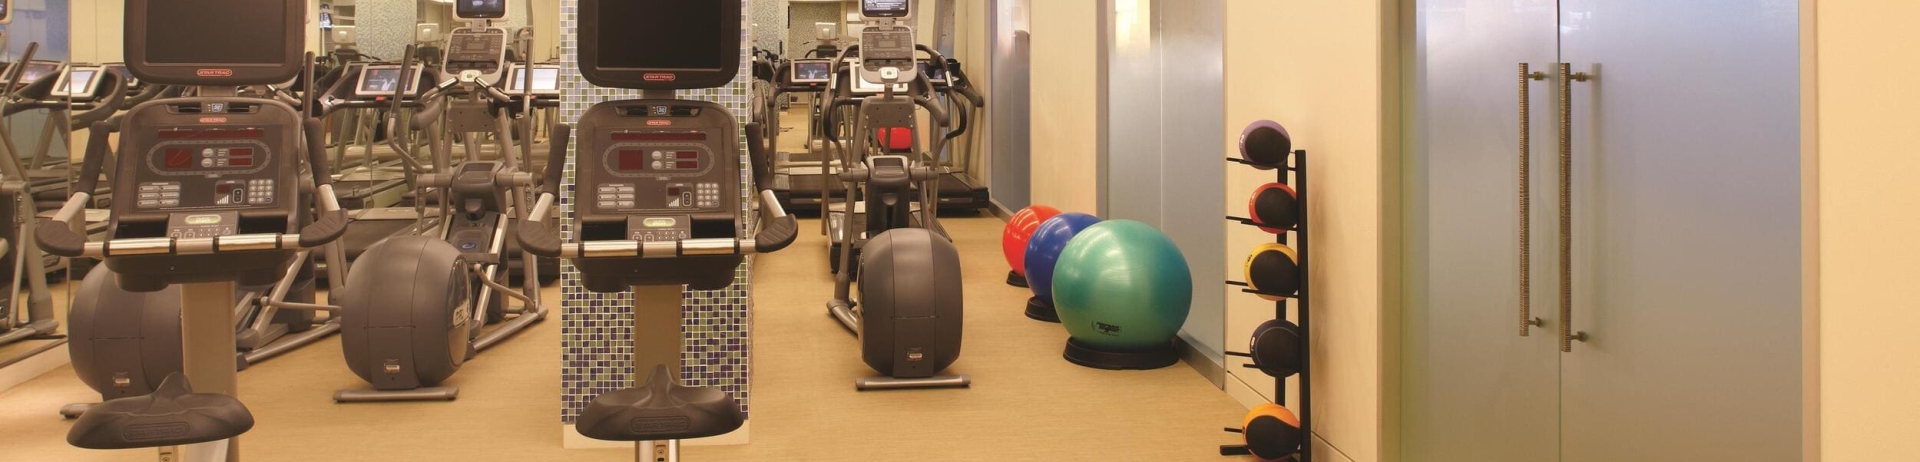 Fitness Clubs & Spa Hotels Chicago